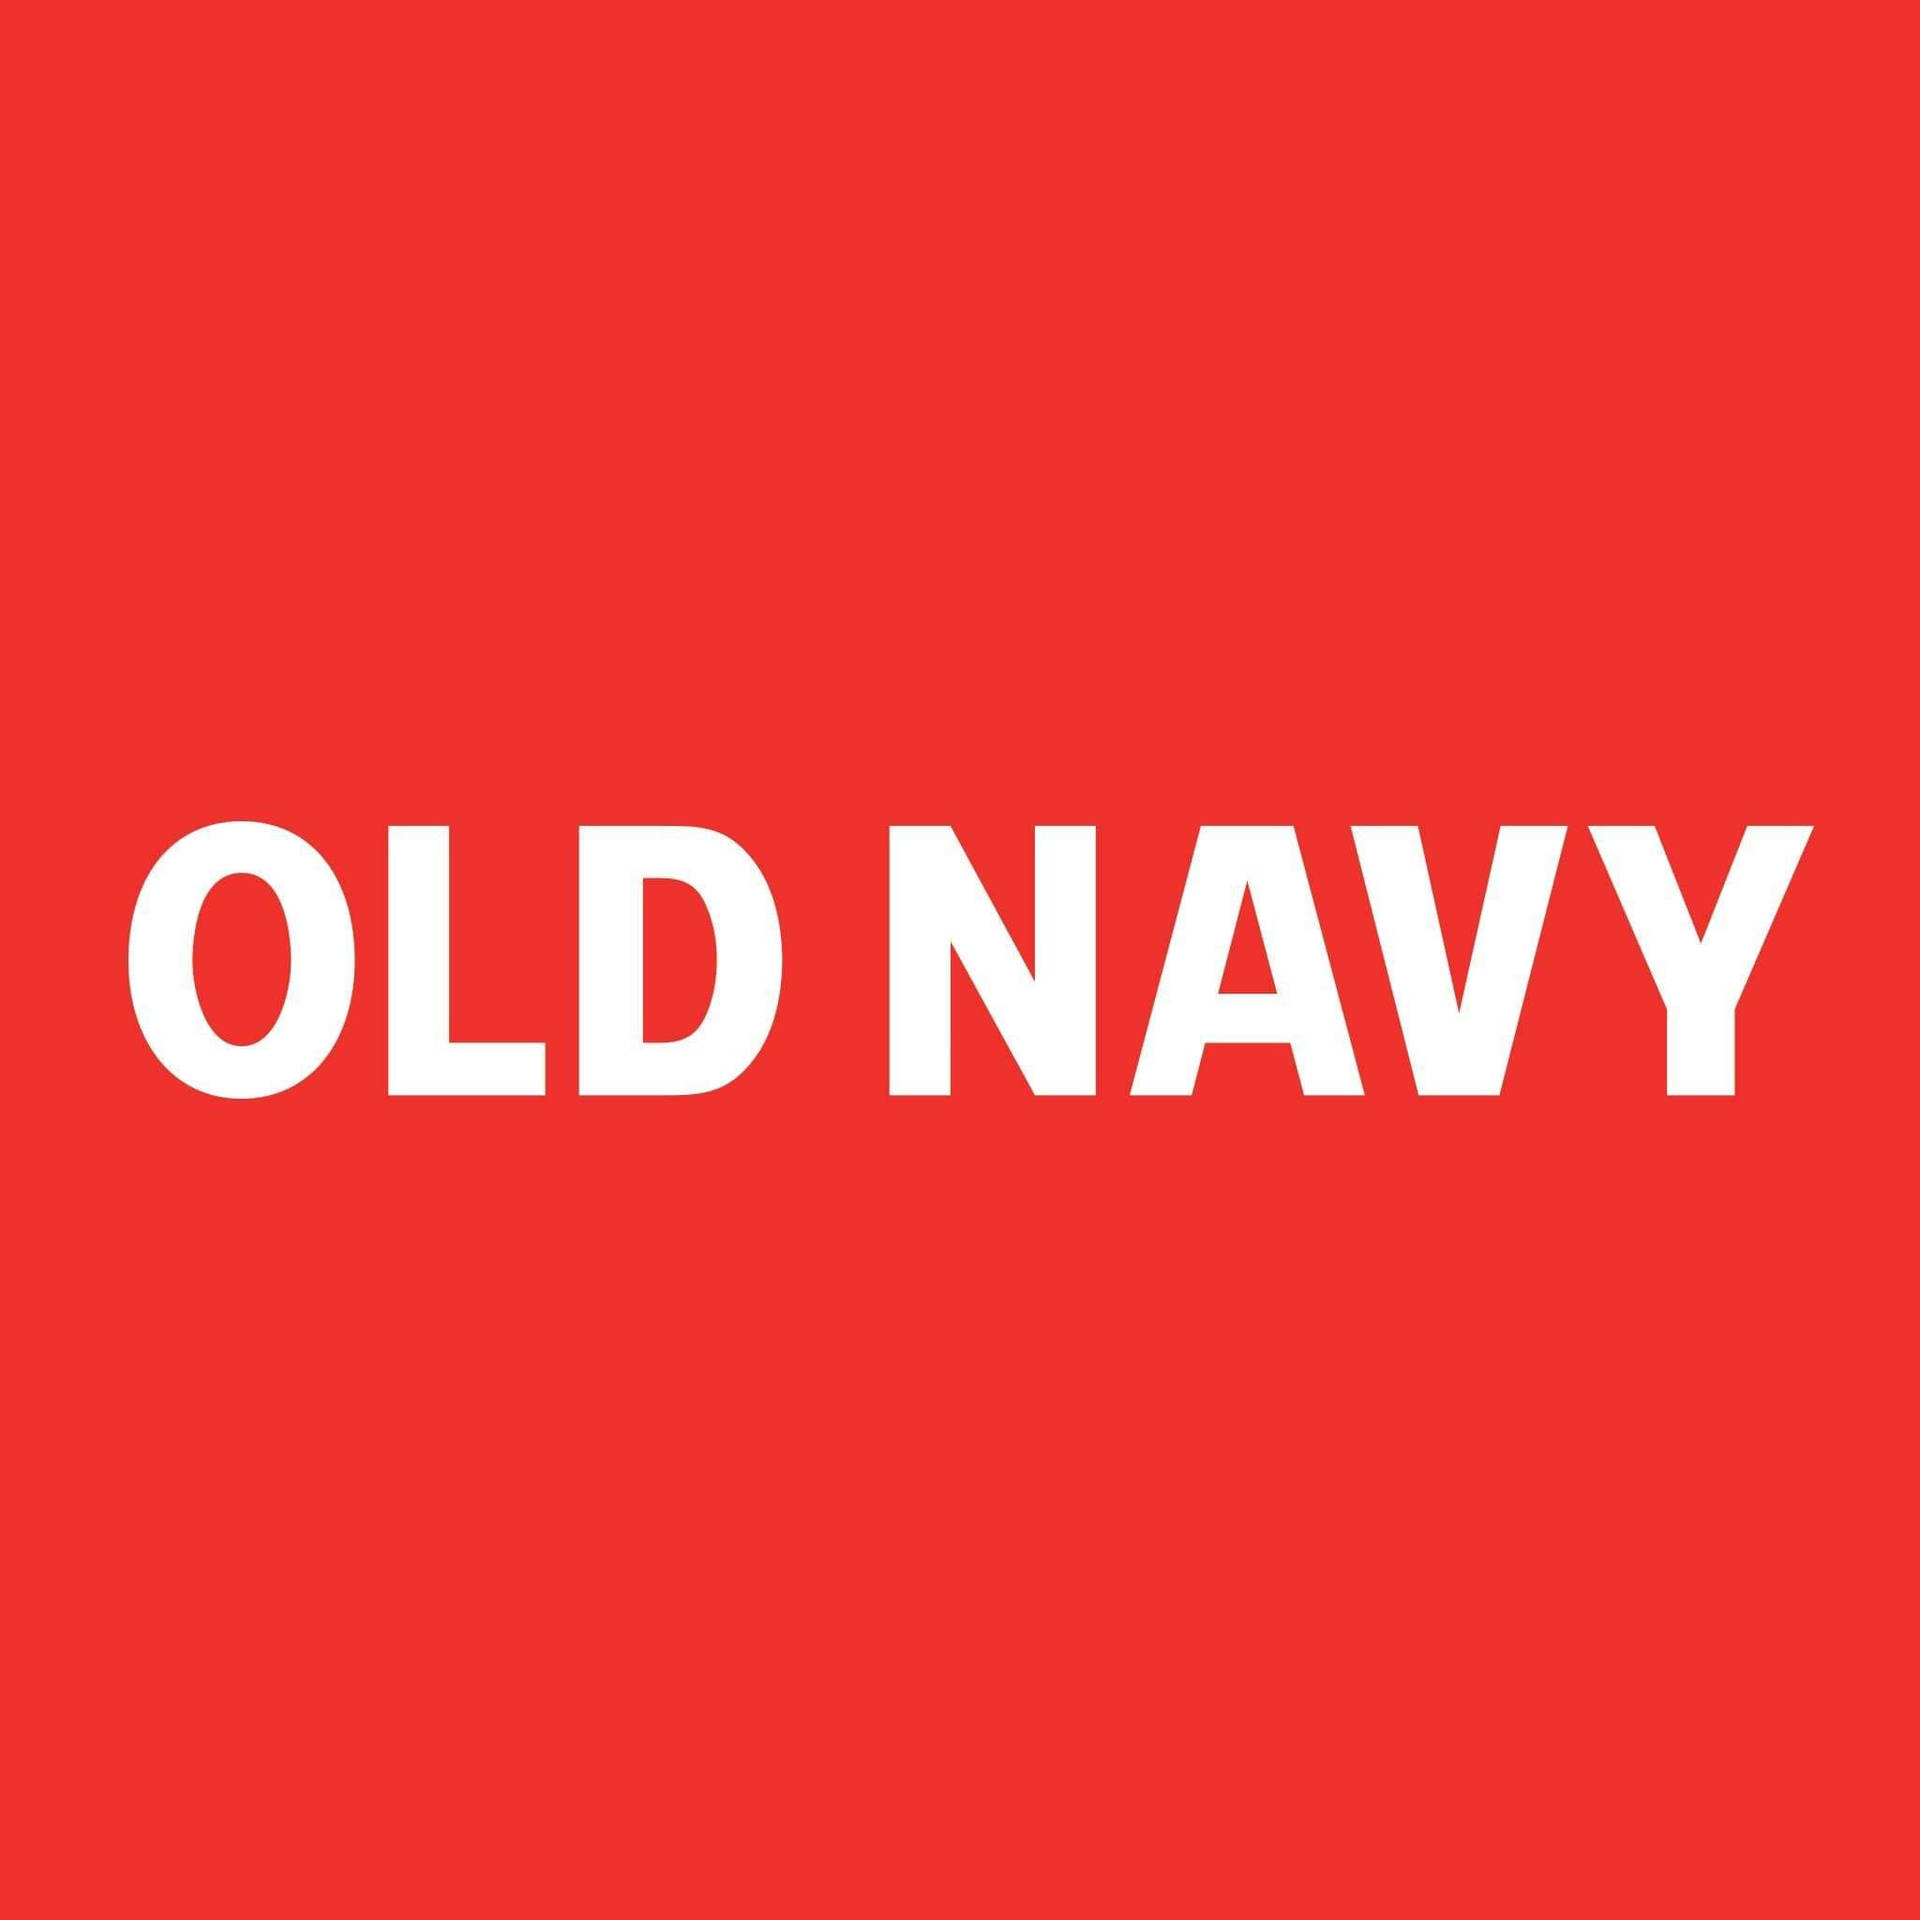 Old Navy Logo Red Background